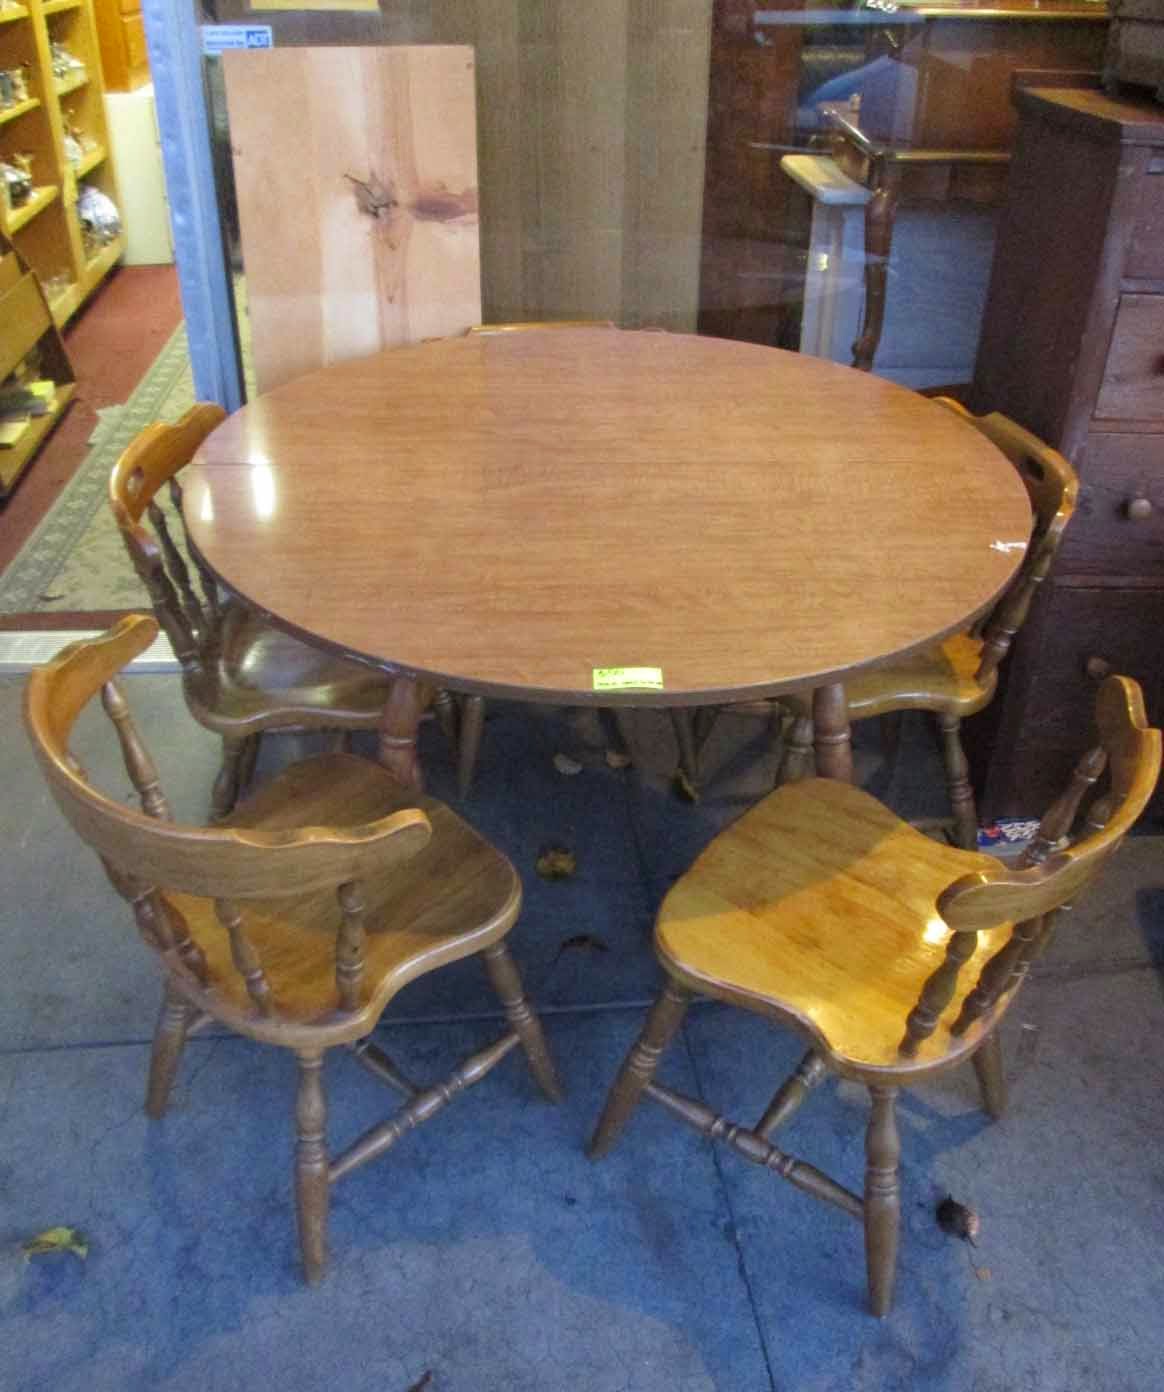 UHURU FURNITURE & COLLECTIBLES: SOLD Round Dining Table, 5 Chairs and 1